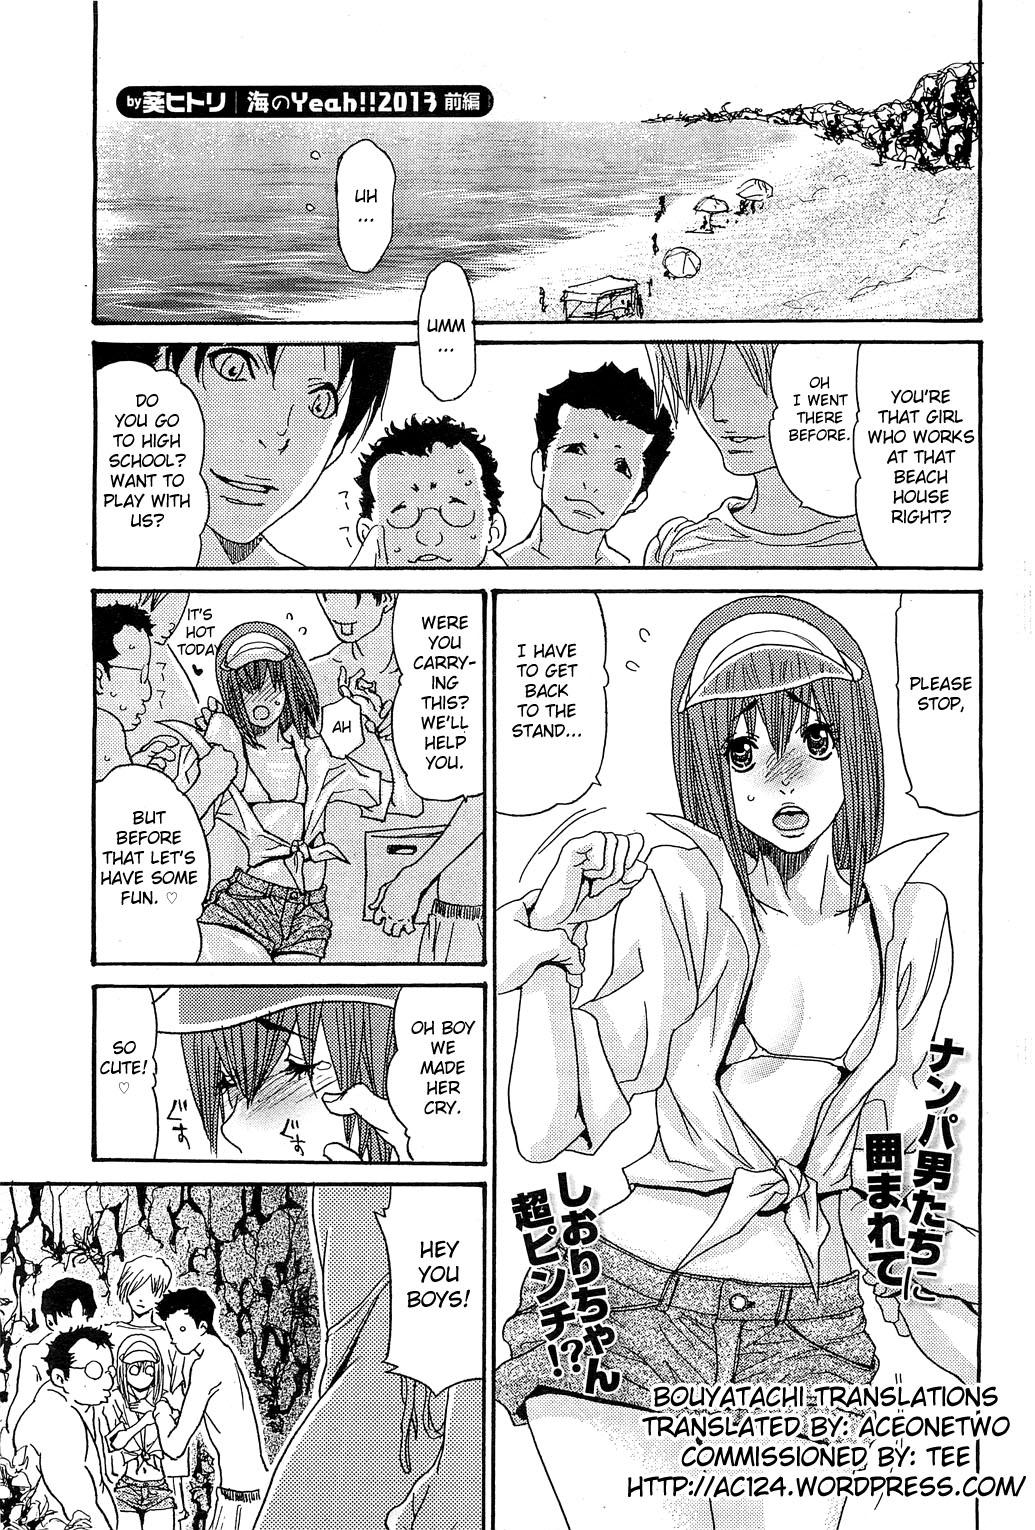 [Aoi Hitori] Umi no Yeah!! 2013 ~The Peaceful Married Couple's Hair Trigger Crisis~ Ch.1 [English][aceonetwo] 0